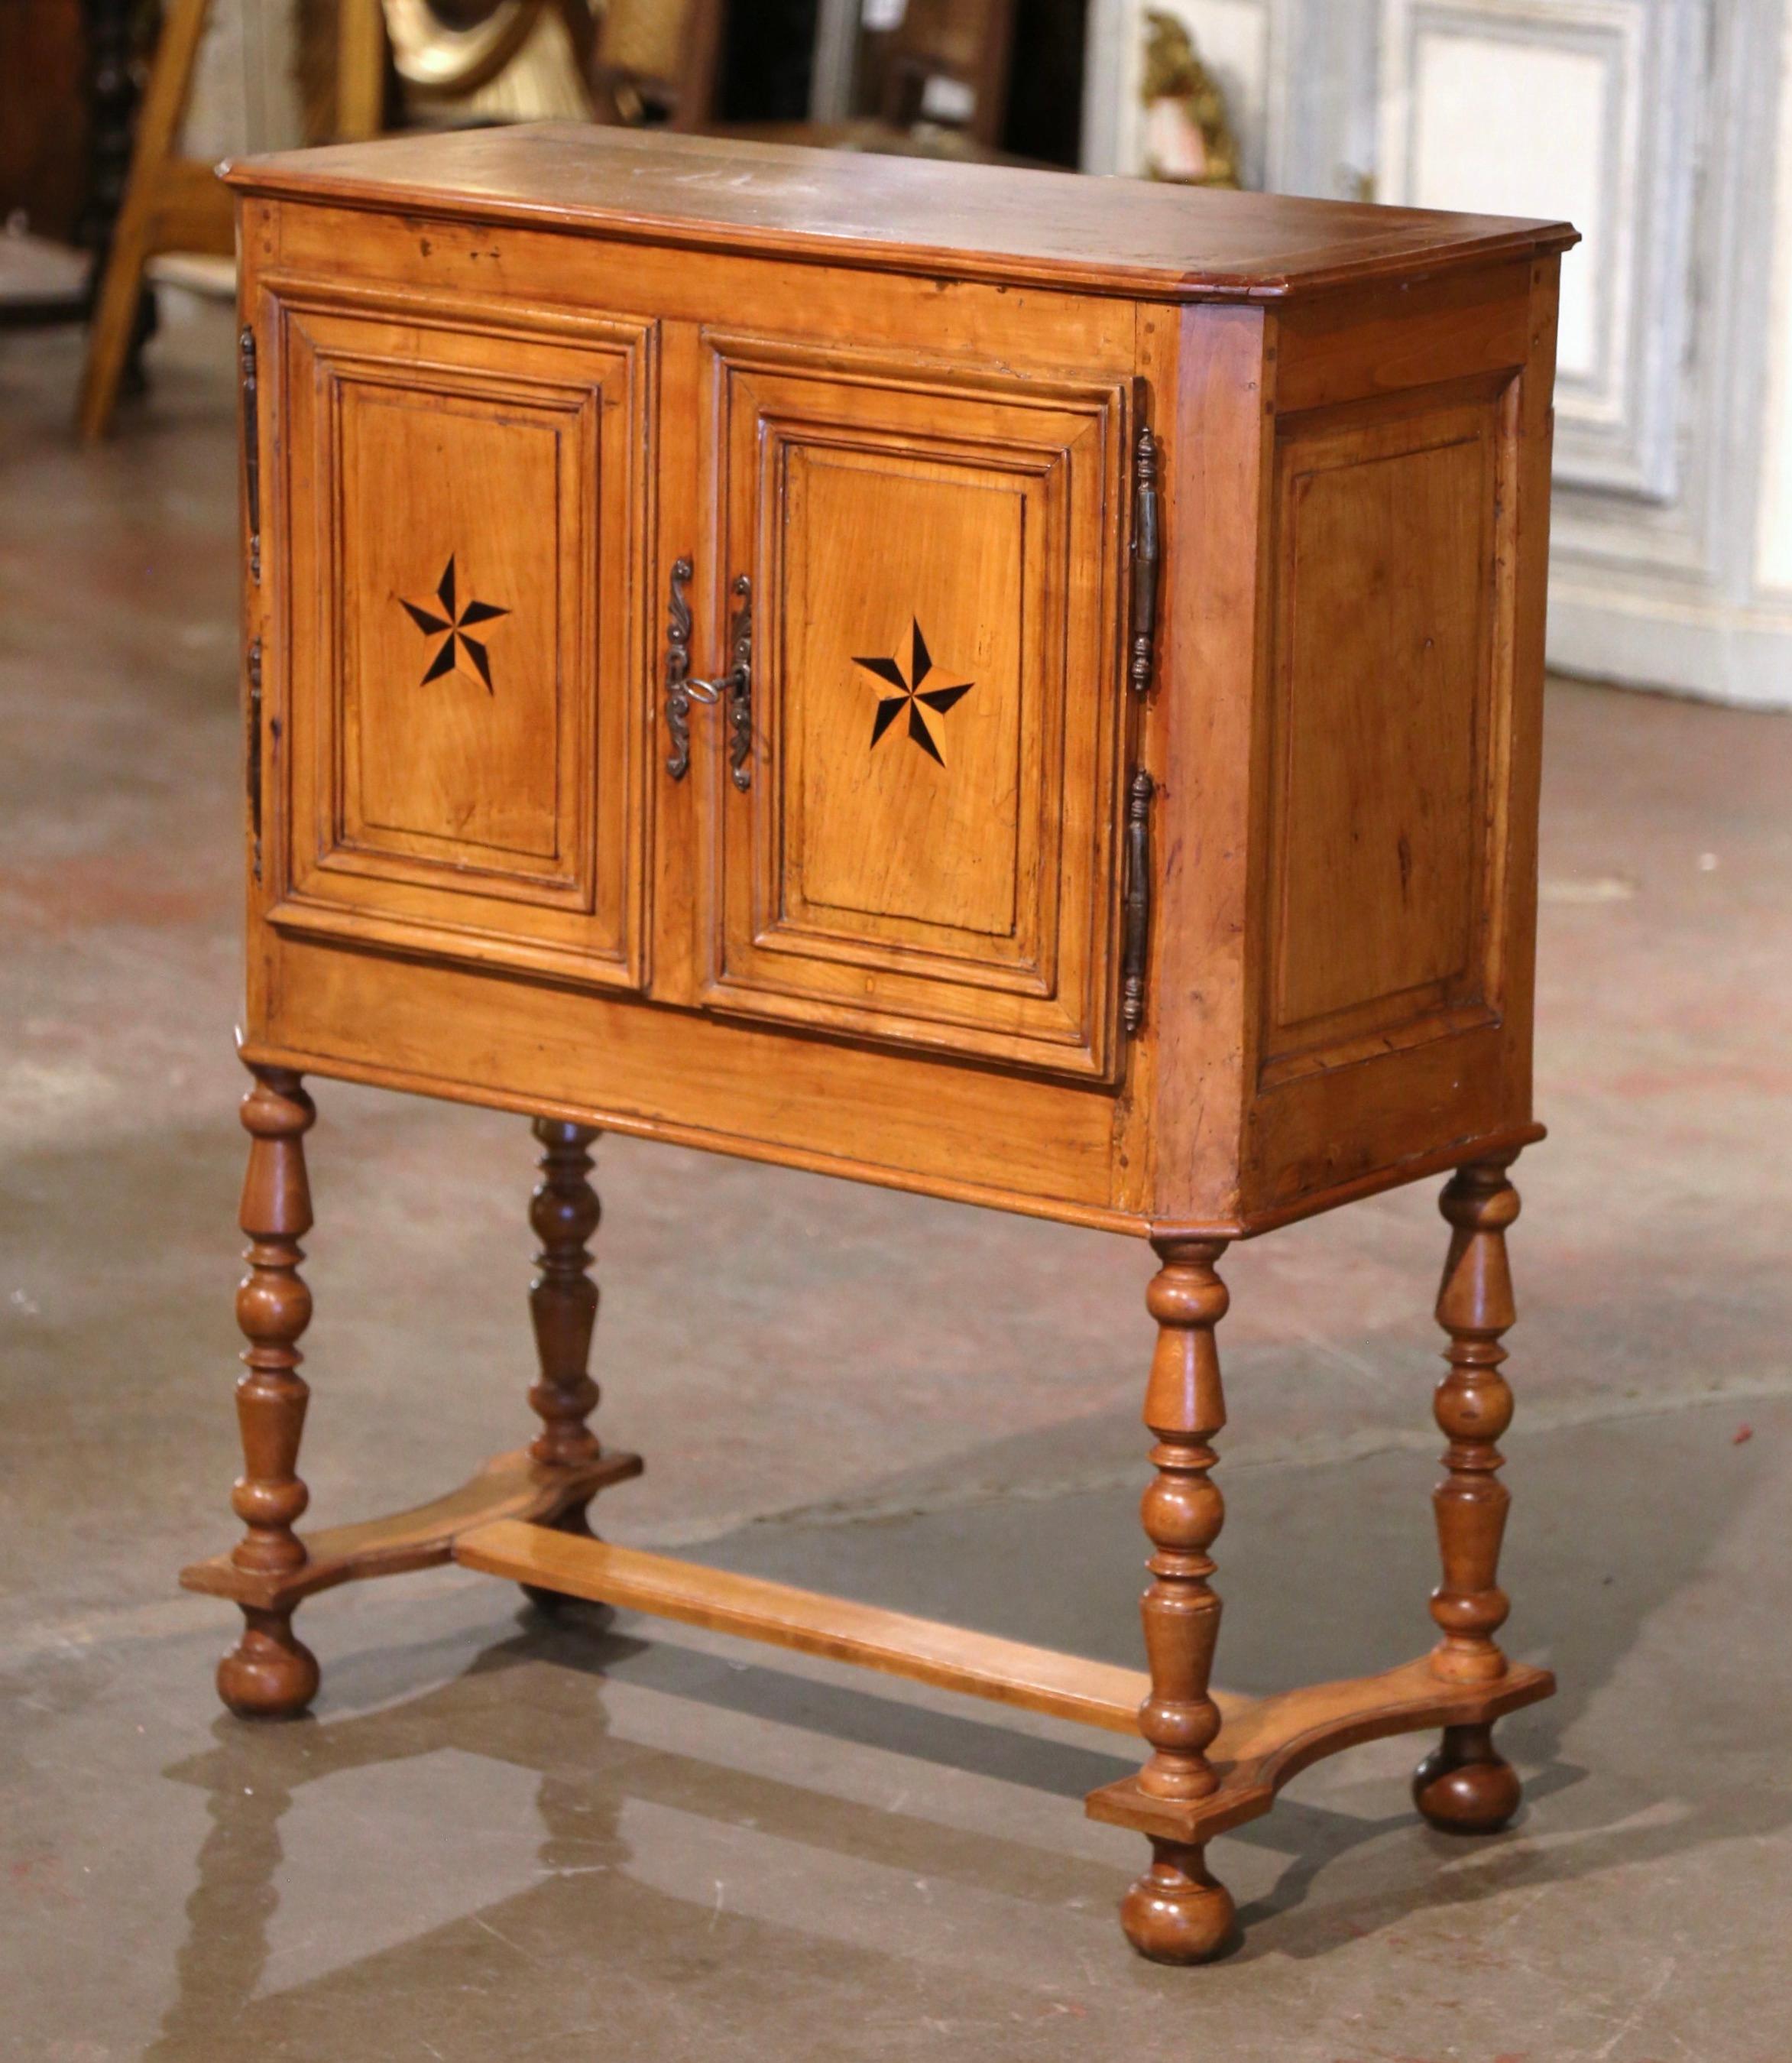 Hand-Carved 19th Century Louis XIII Carved Cherry and Oak Buffet Cabinet with Inlaid Motifs